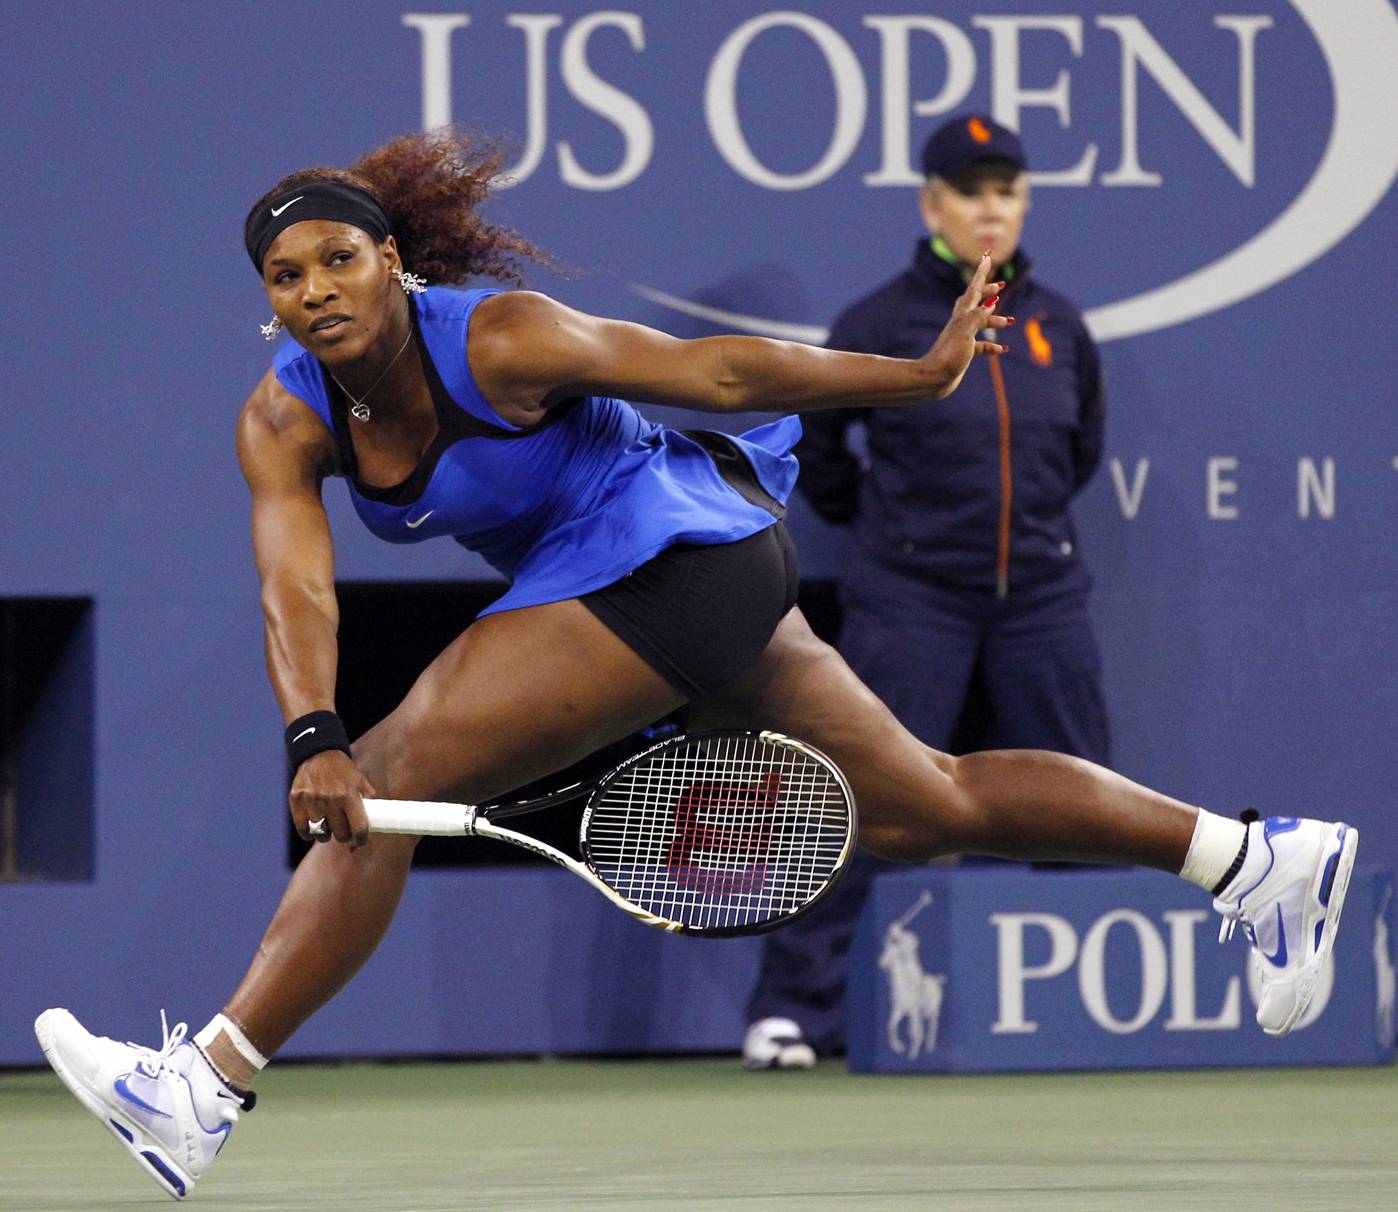 Serena Williams Tries to Make It Two for Two